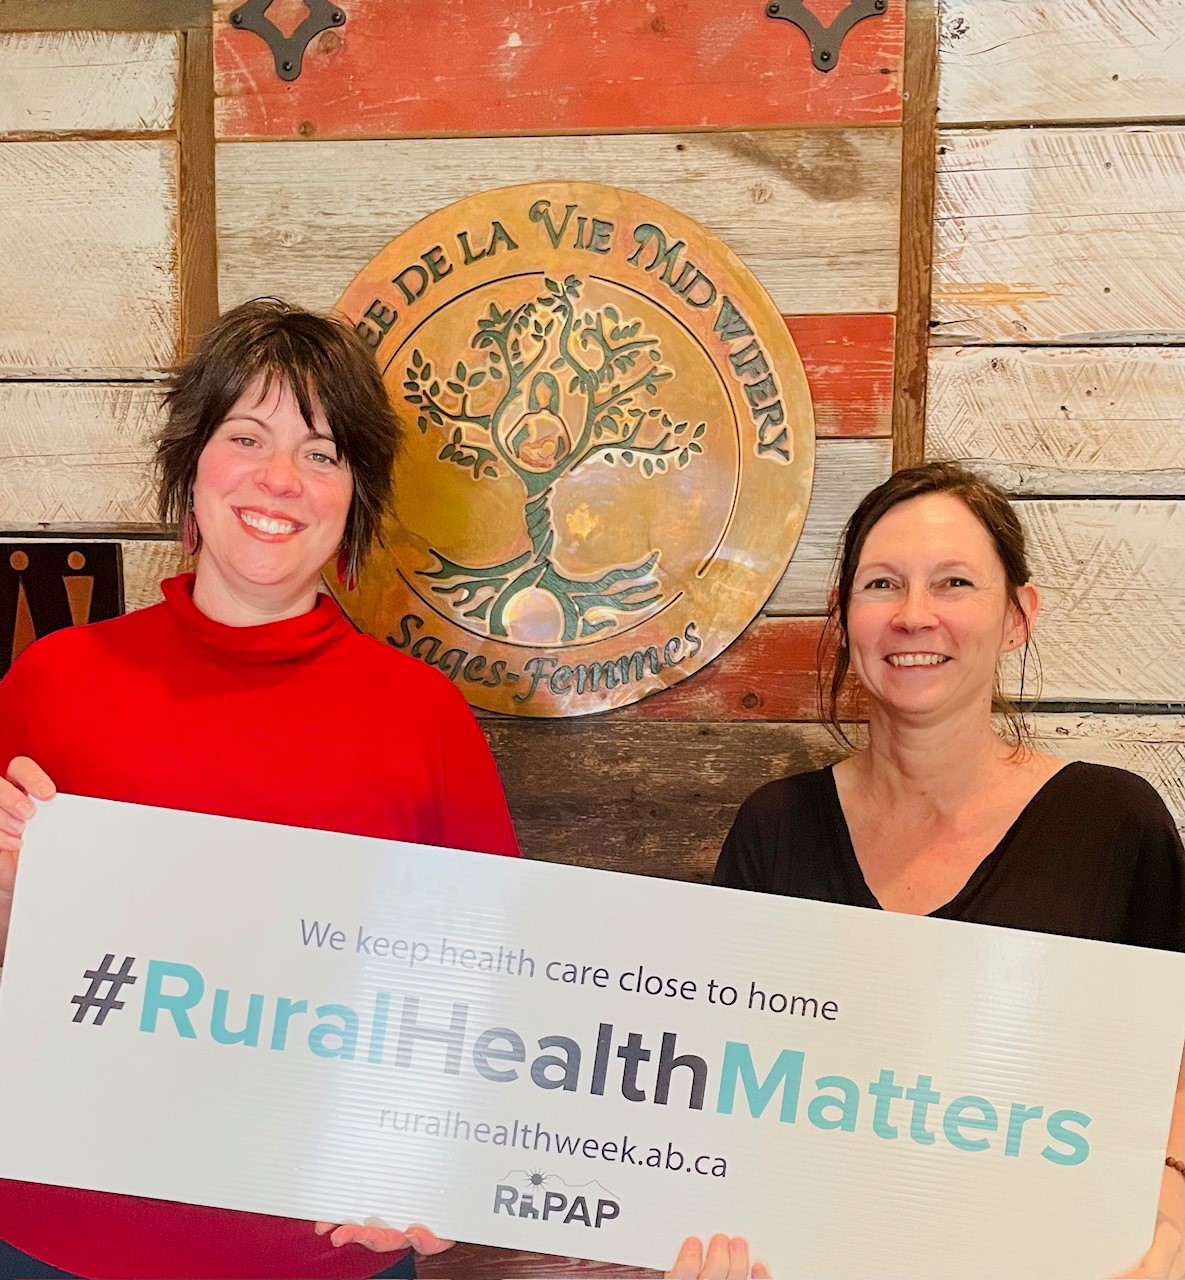 Chantal and an unnamed coworker carrying a sign saying #Rural Health Matters